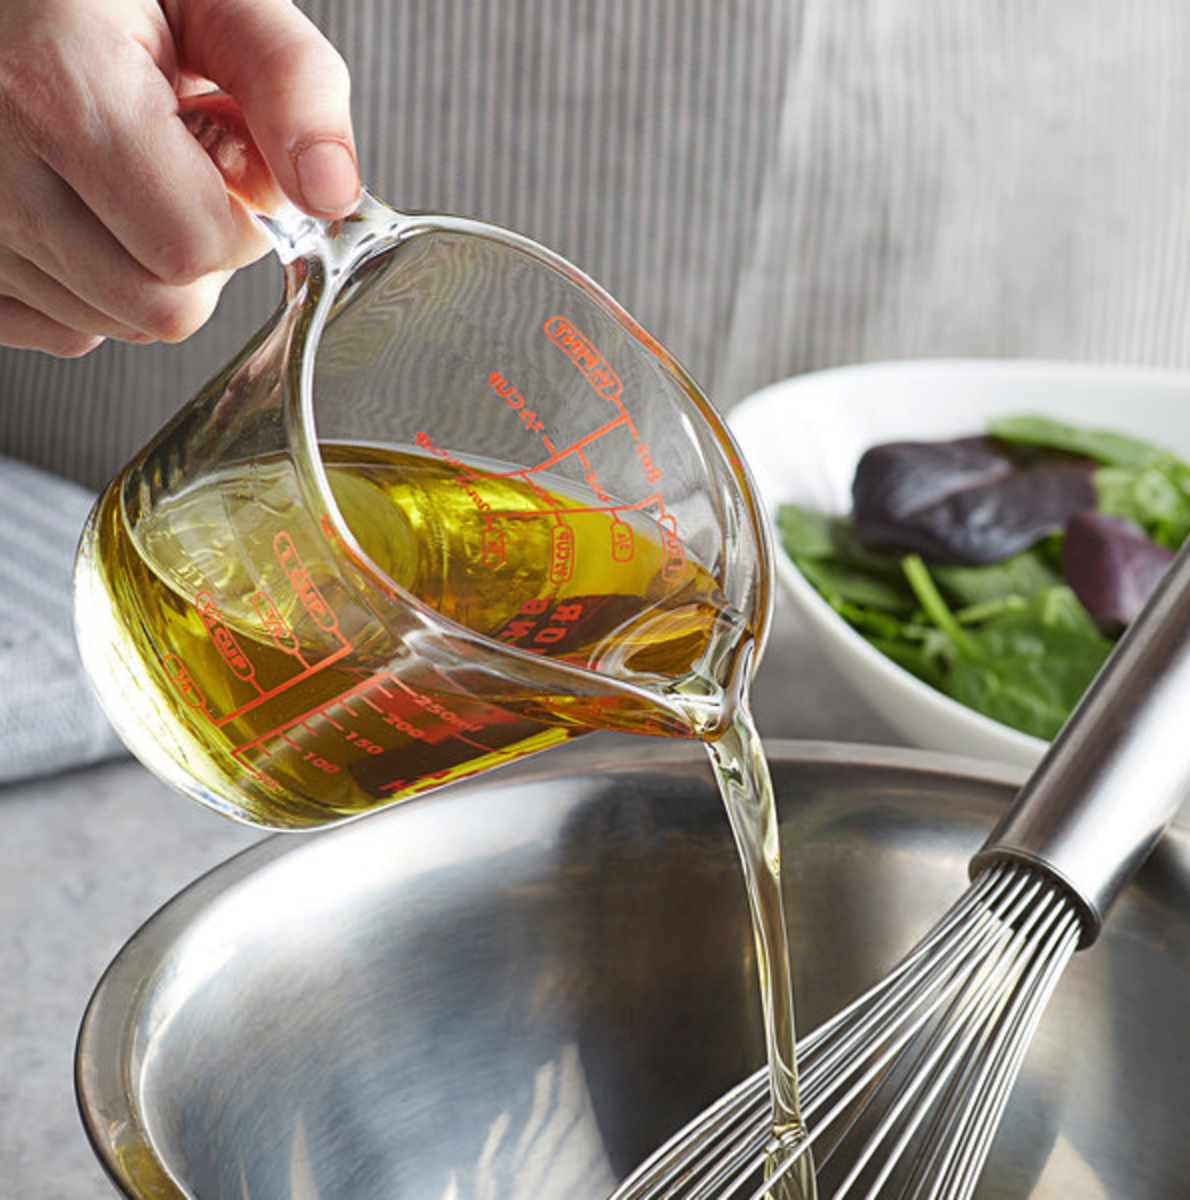 6-oils-every-household-should-have